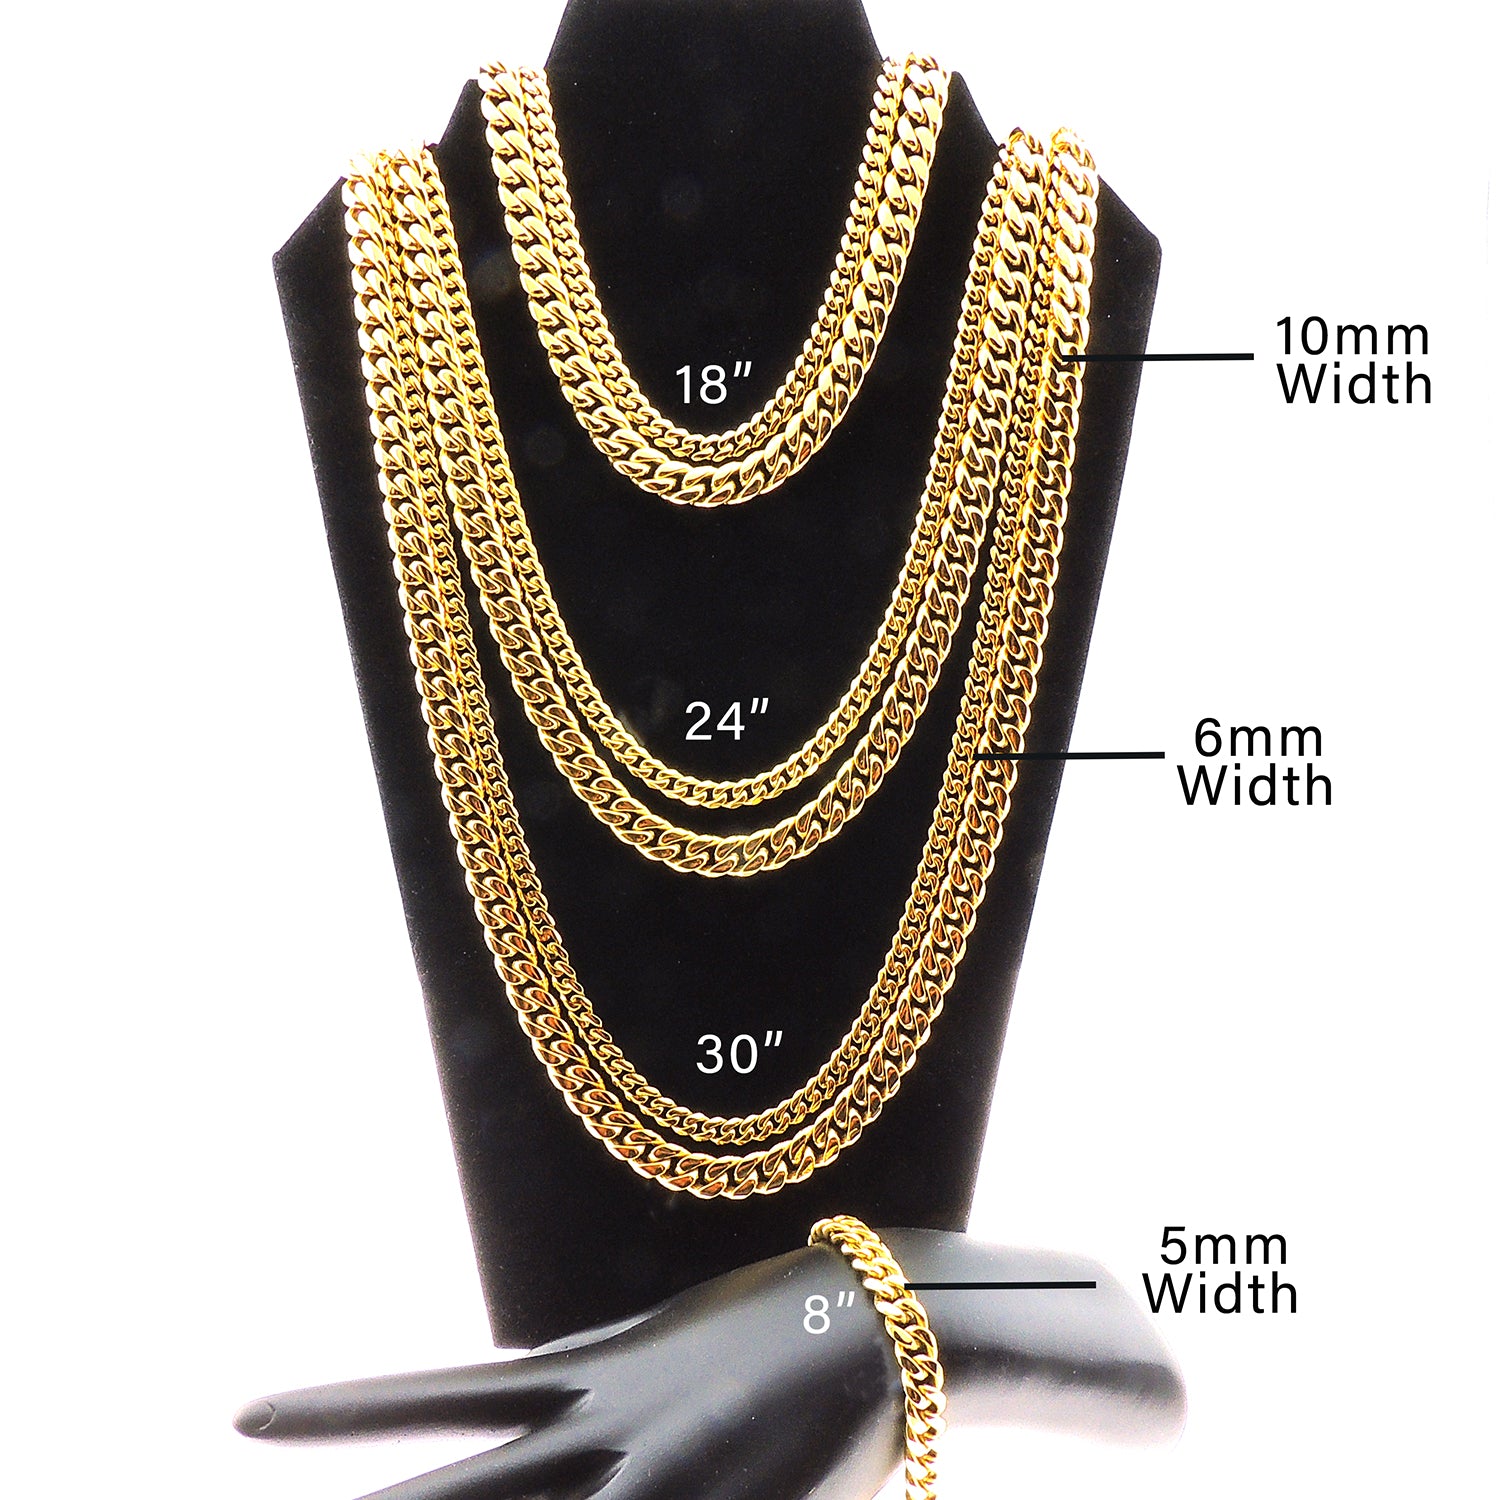 Cuban Link Chain Necklace Gold Stainless Steel Hip Hop Men Women Ginger Lyne Collection - Gold-10mm-24